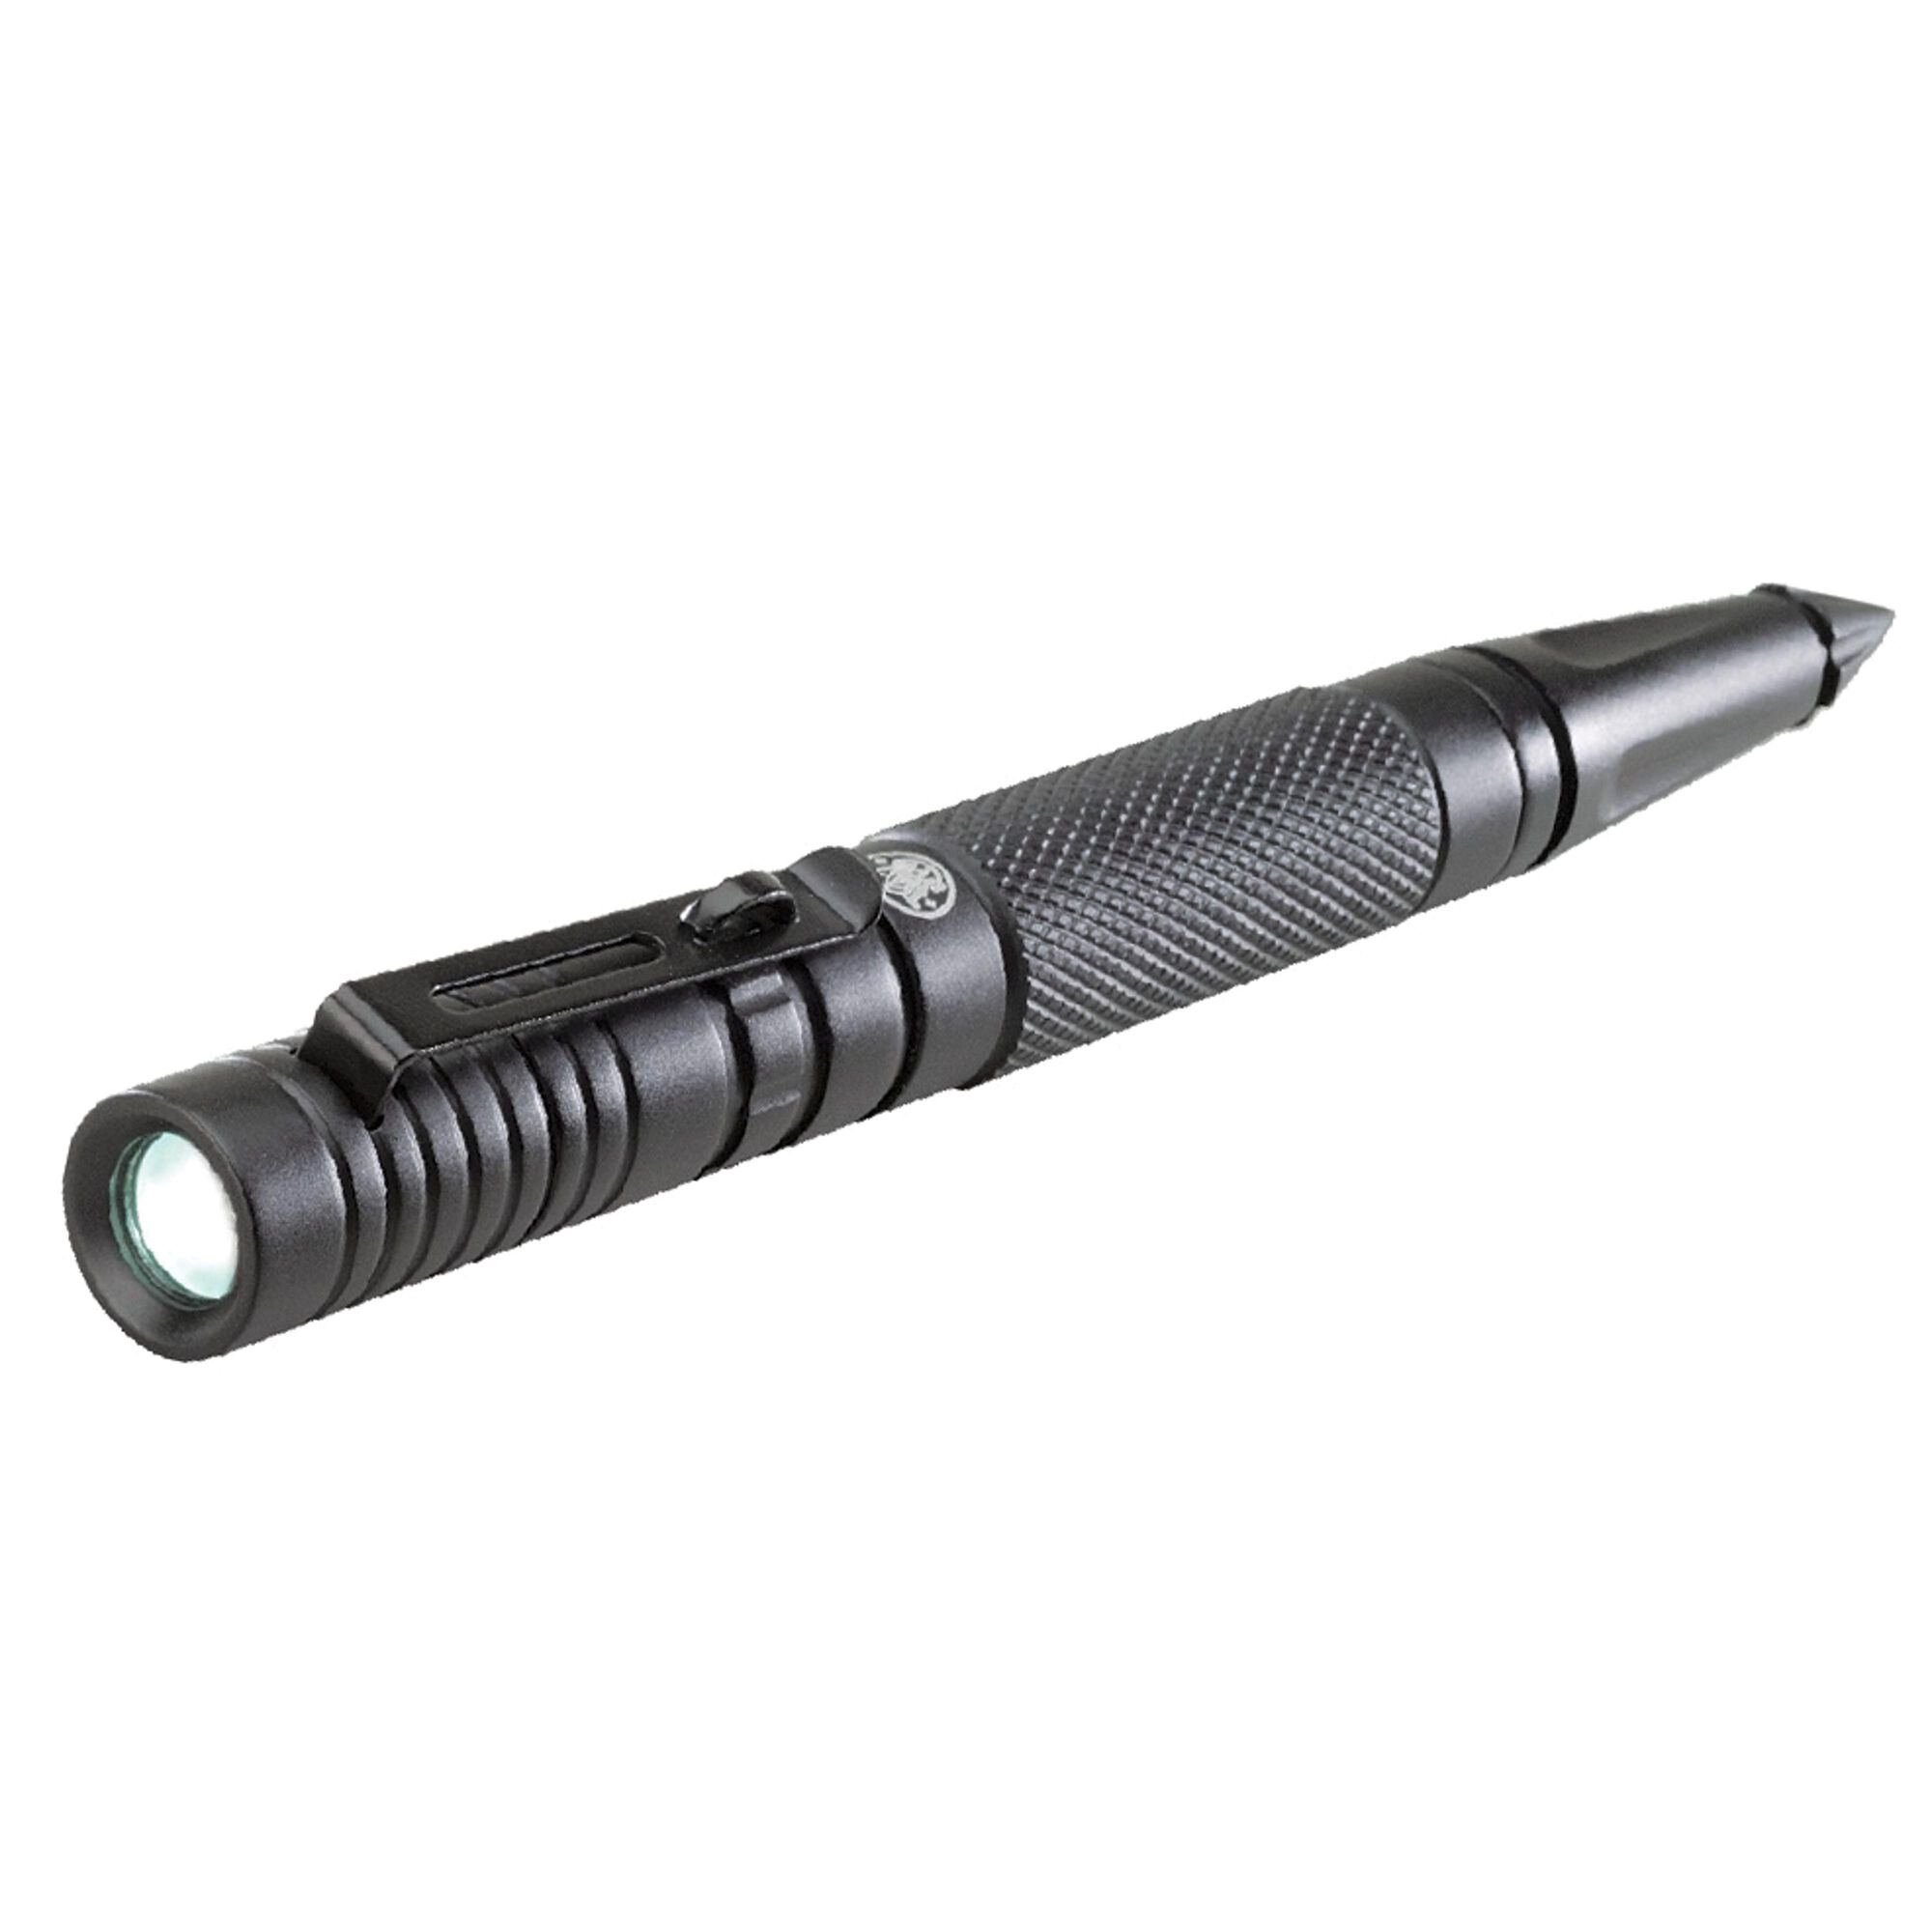 Smith Wesson® Tactical Penlight | Smith Wesson